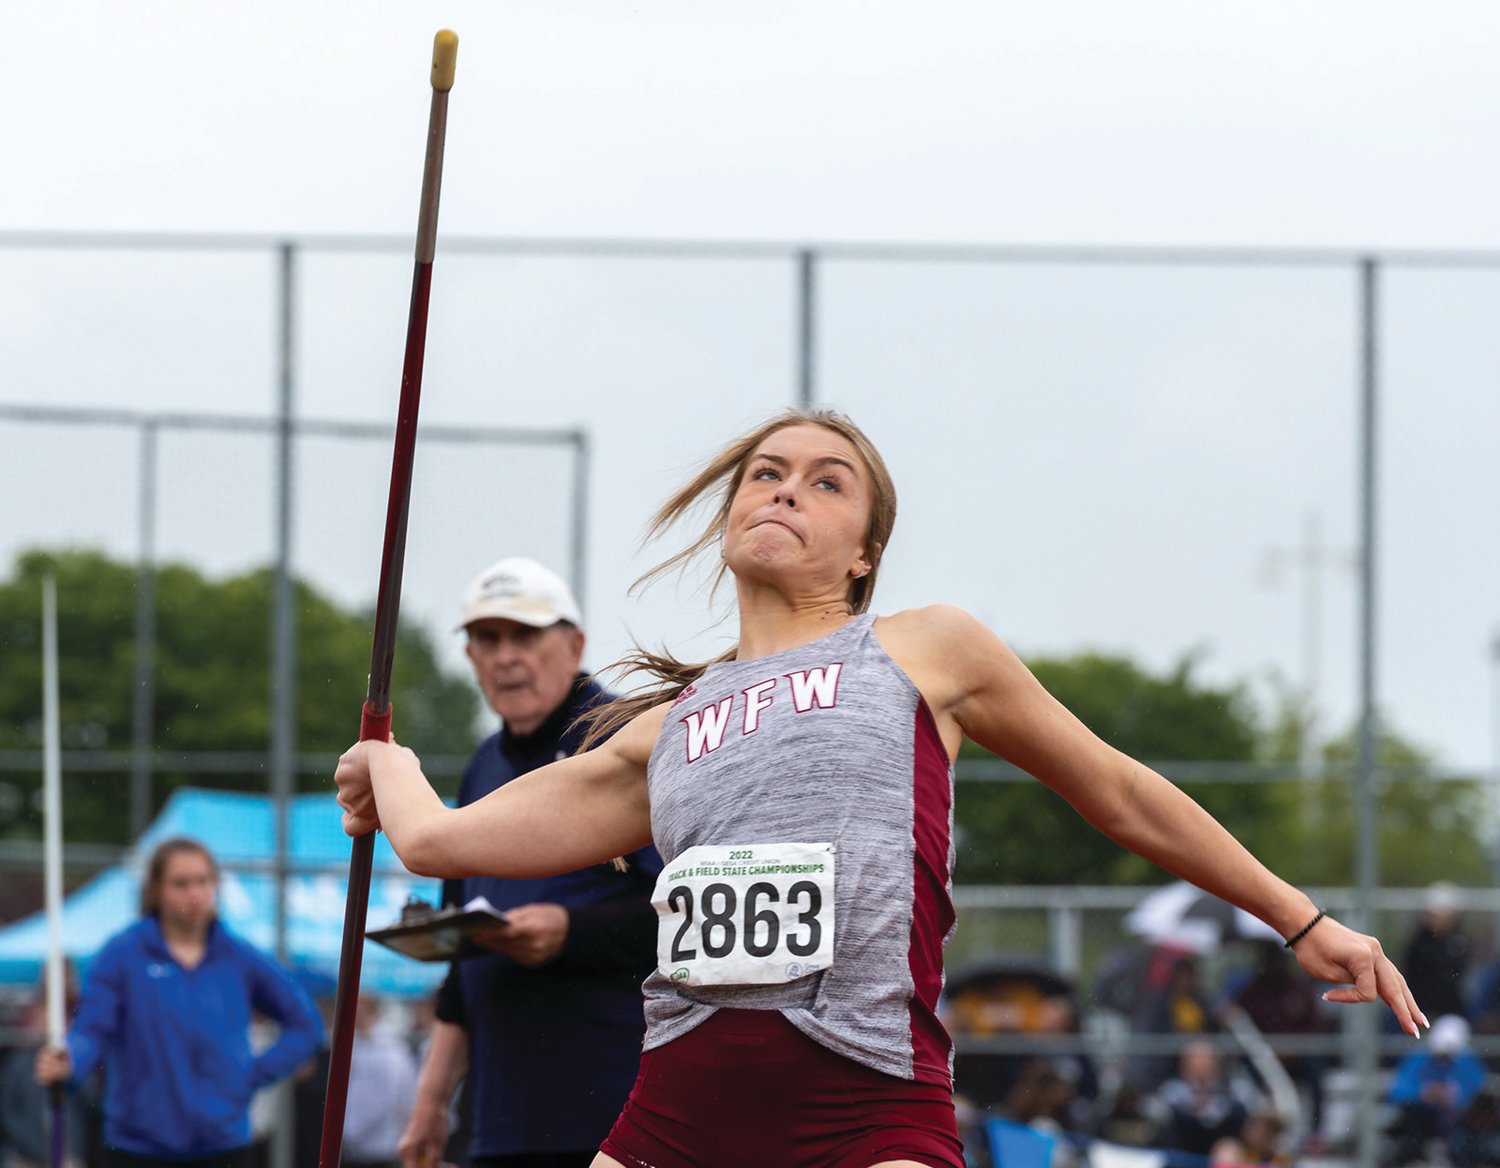 W.F. West's Kyla McCallum throws a javelin in the 2A Girls Javelin at the 2A/3A/4A State Track and Field Championships on Thursday, May 26, 2022, at Mount Tahoma High School in Tacoma. (Joshua Hart/For The Chronicle)